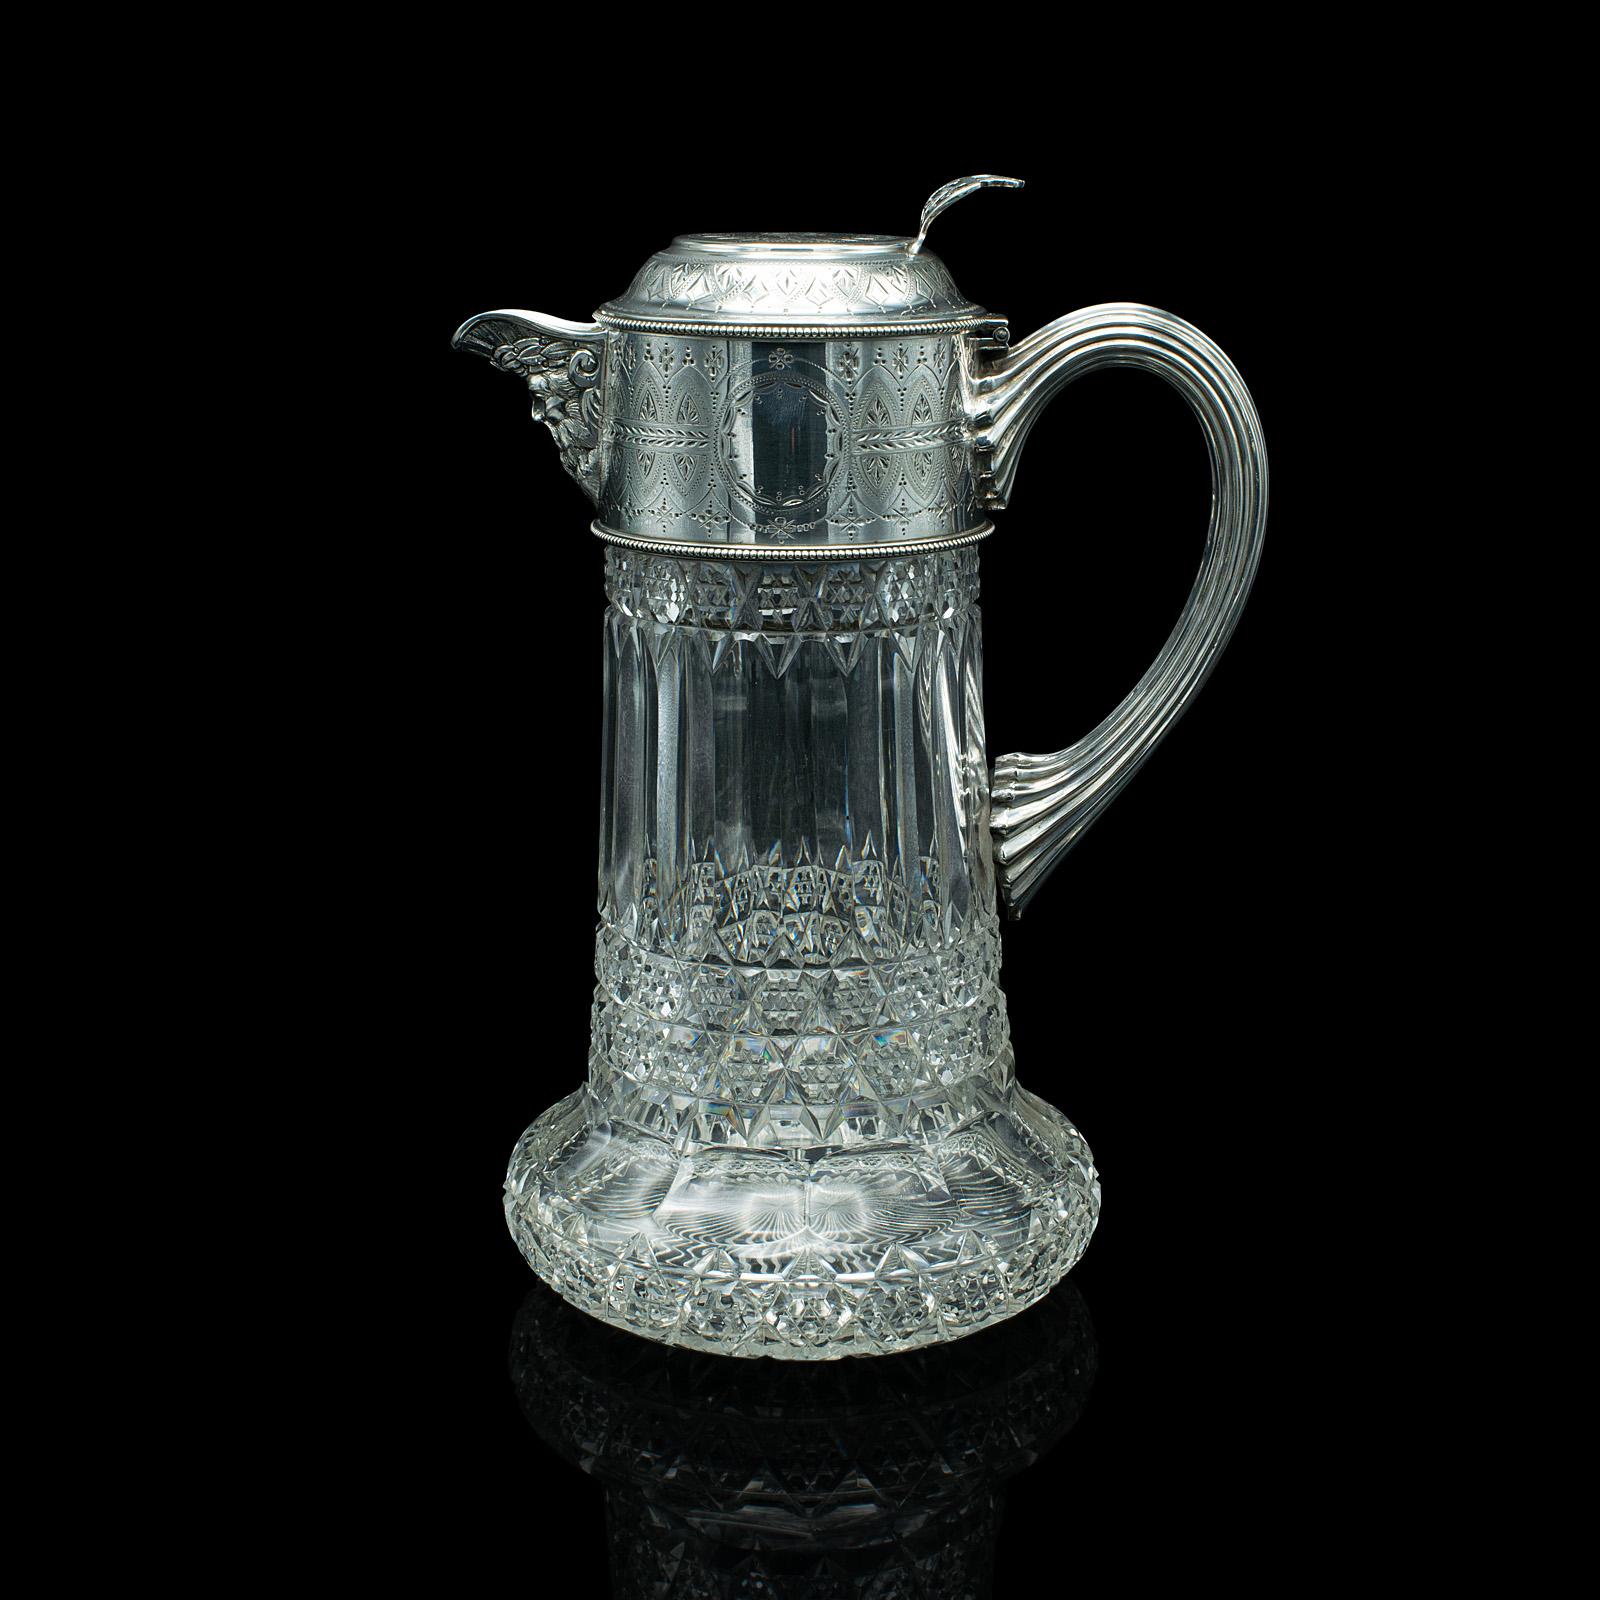 Antique Claret Jug, English, Cut Glass, Silver Plate, Decanter, Victorian, 1900 In Good Condition For Sale In Hele, Devon, GB